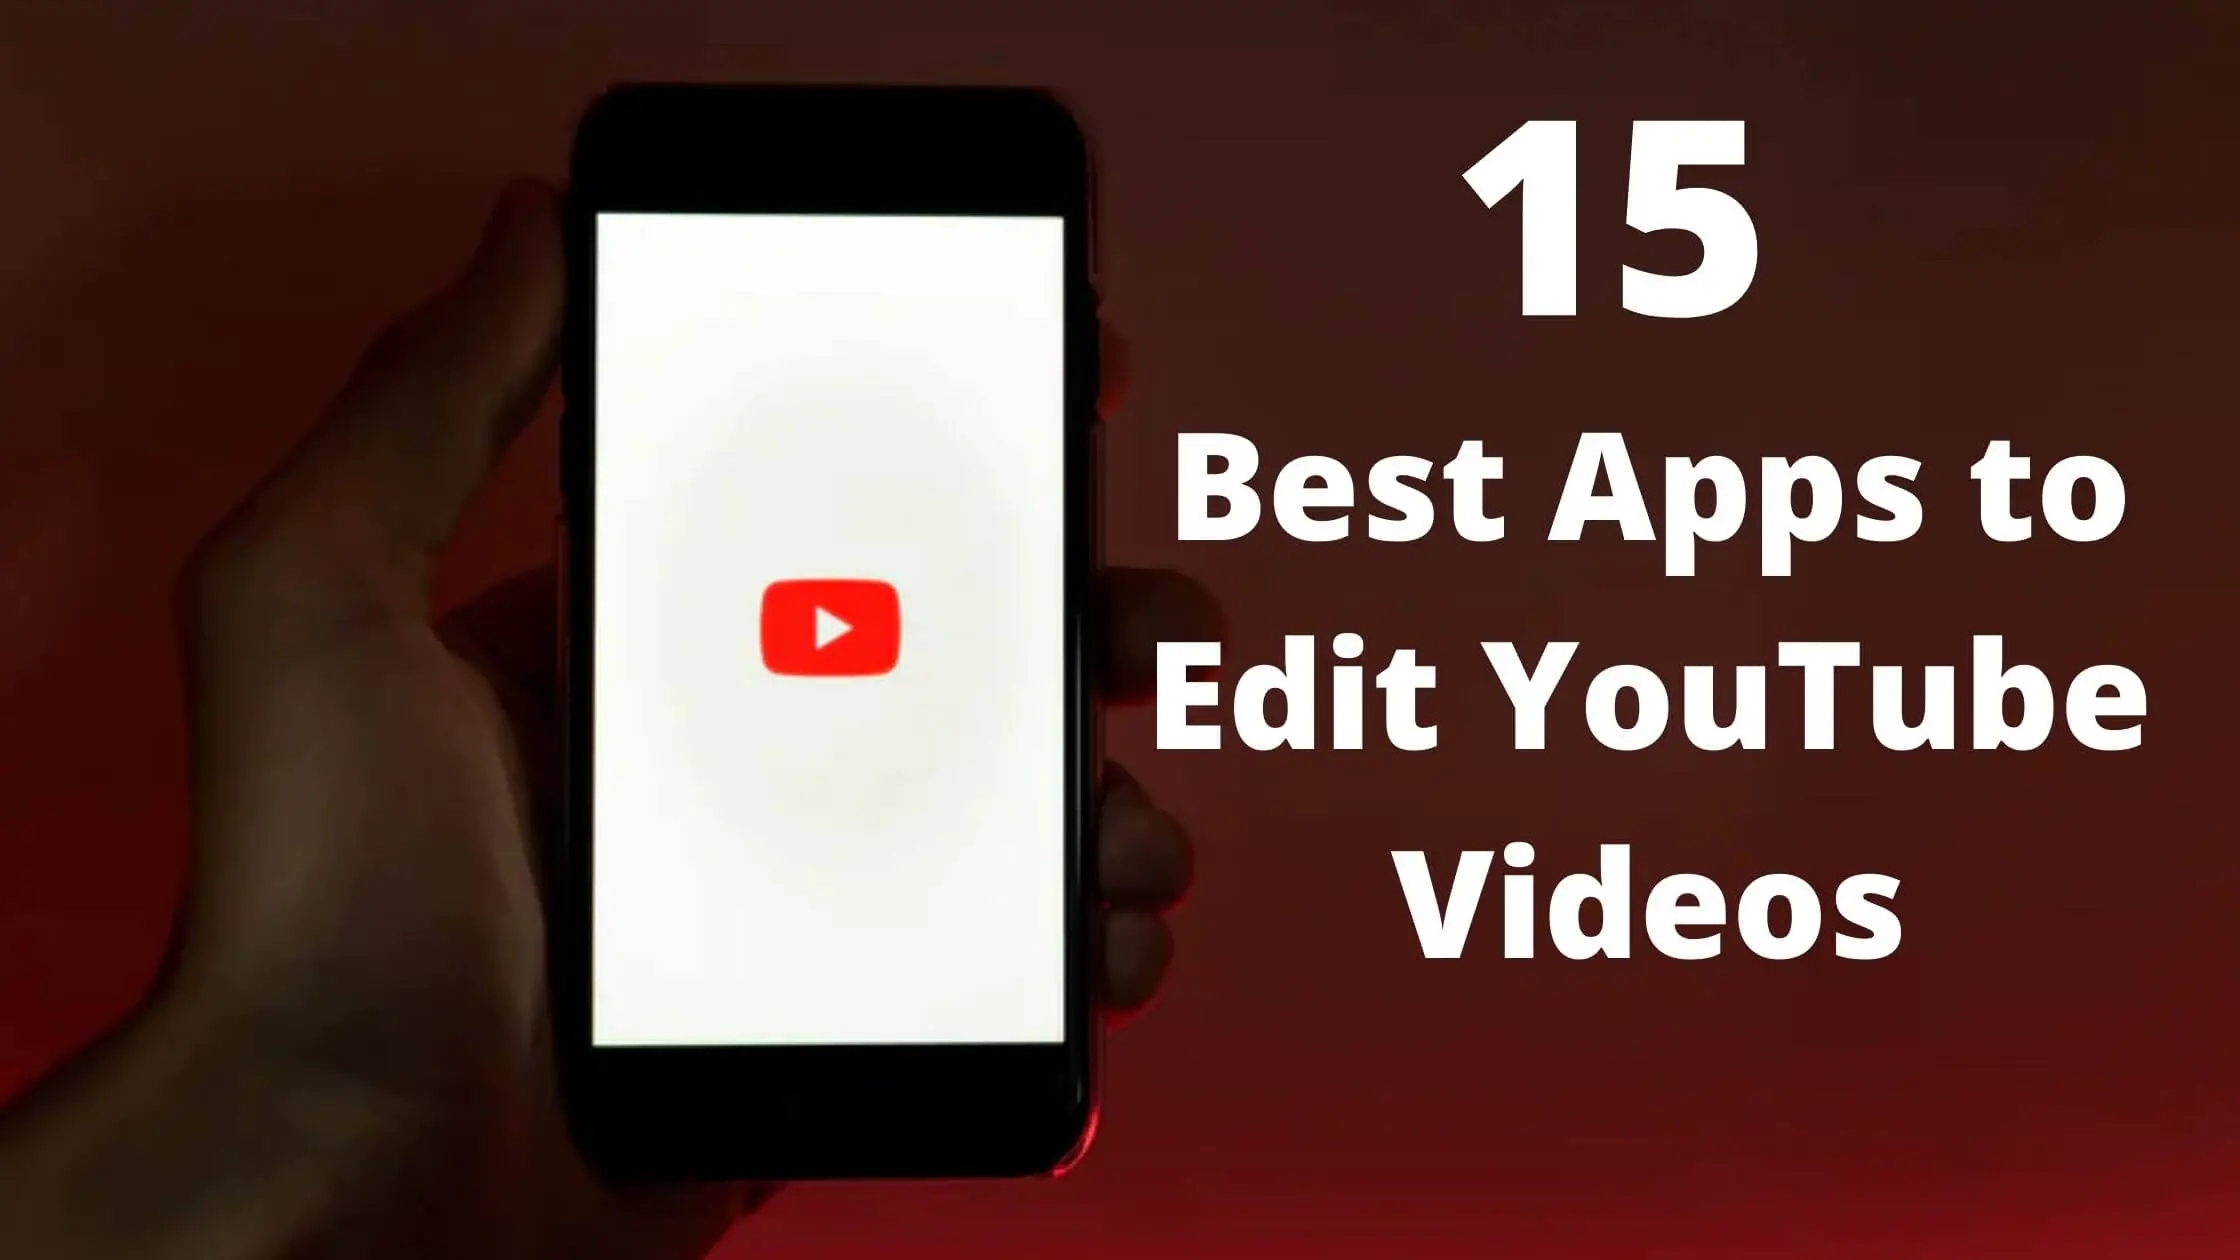 Best Apps to Edit YouTube Videos